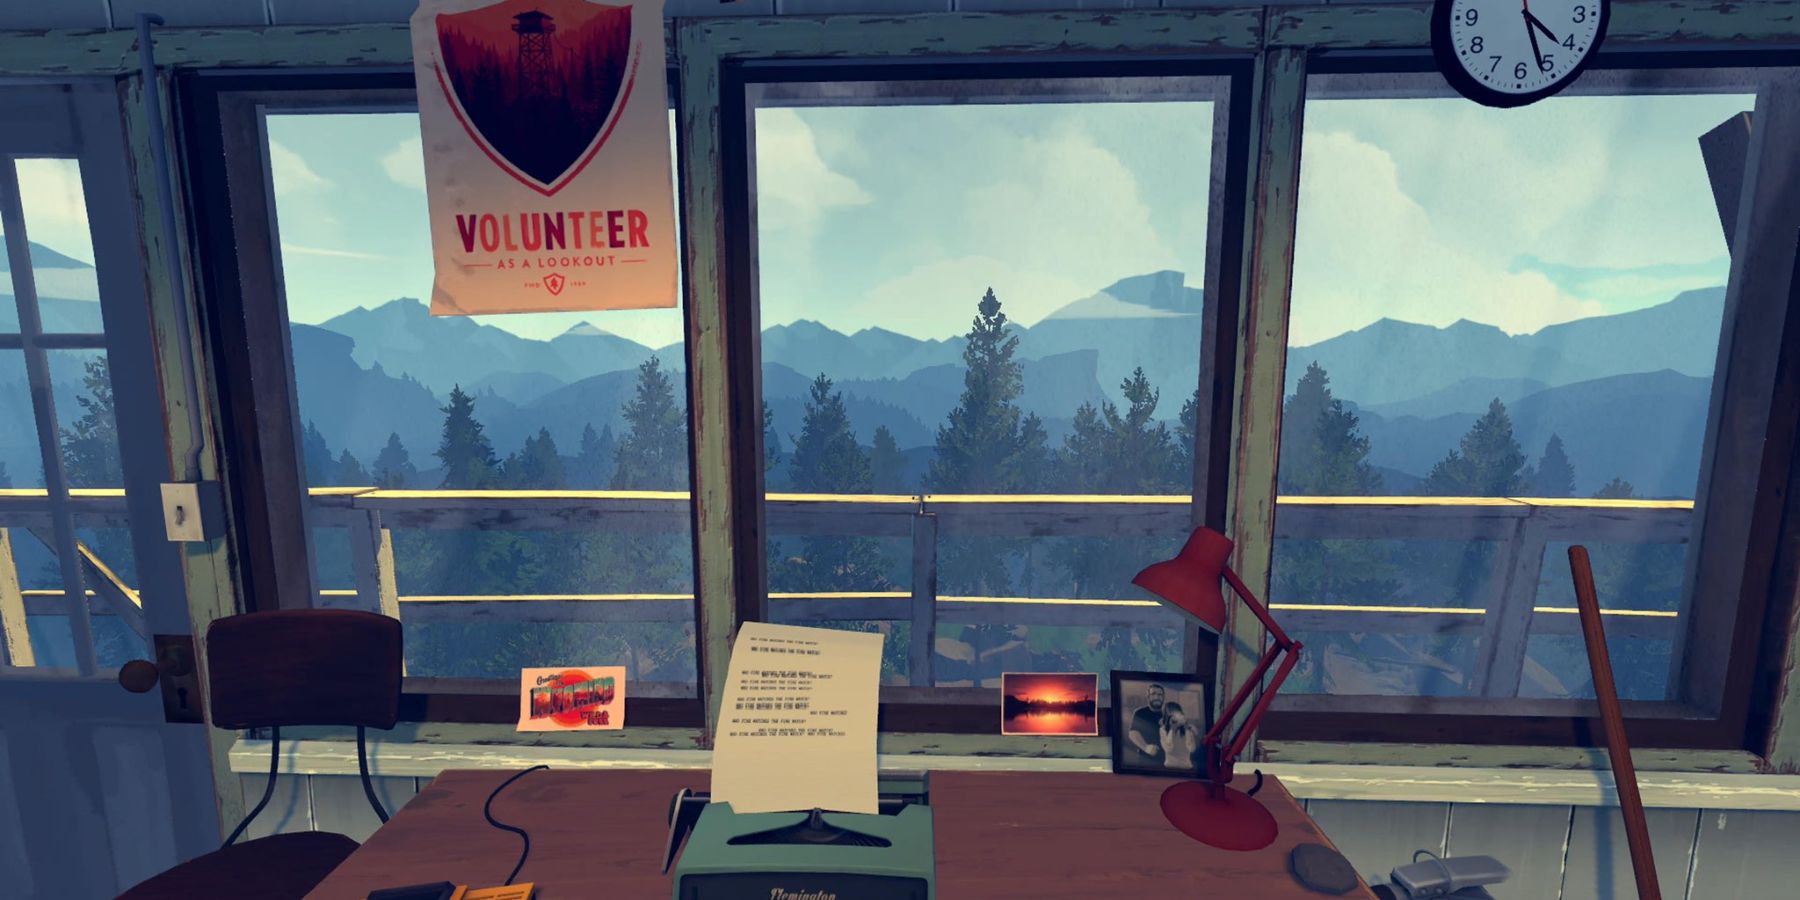 the inside of a tall, watchtower with a typewriter on a desk, postcards on the windowsill, and a volunteer posted with a watchtower pictured inside a shield outline. trees and mountains can be seen outside the windows 